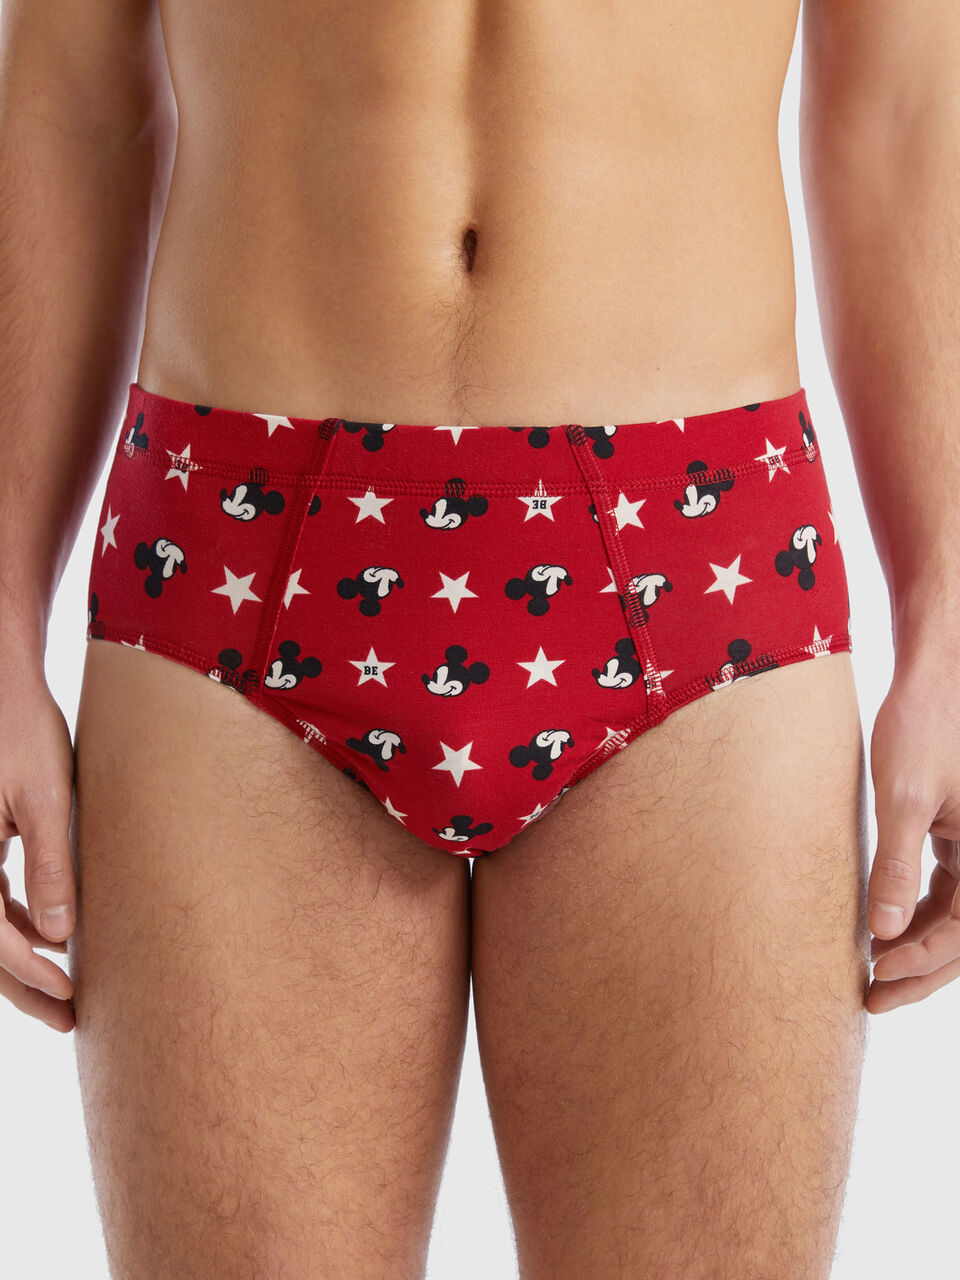 Mickey Mouse underwear - Red